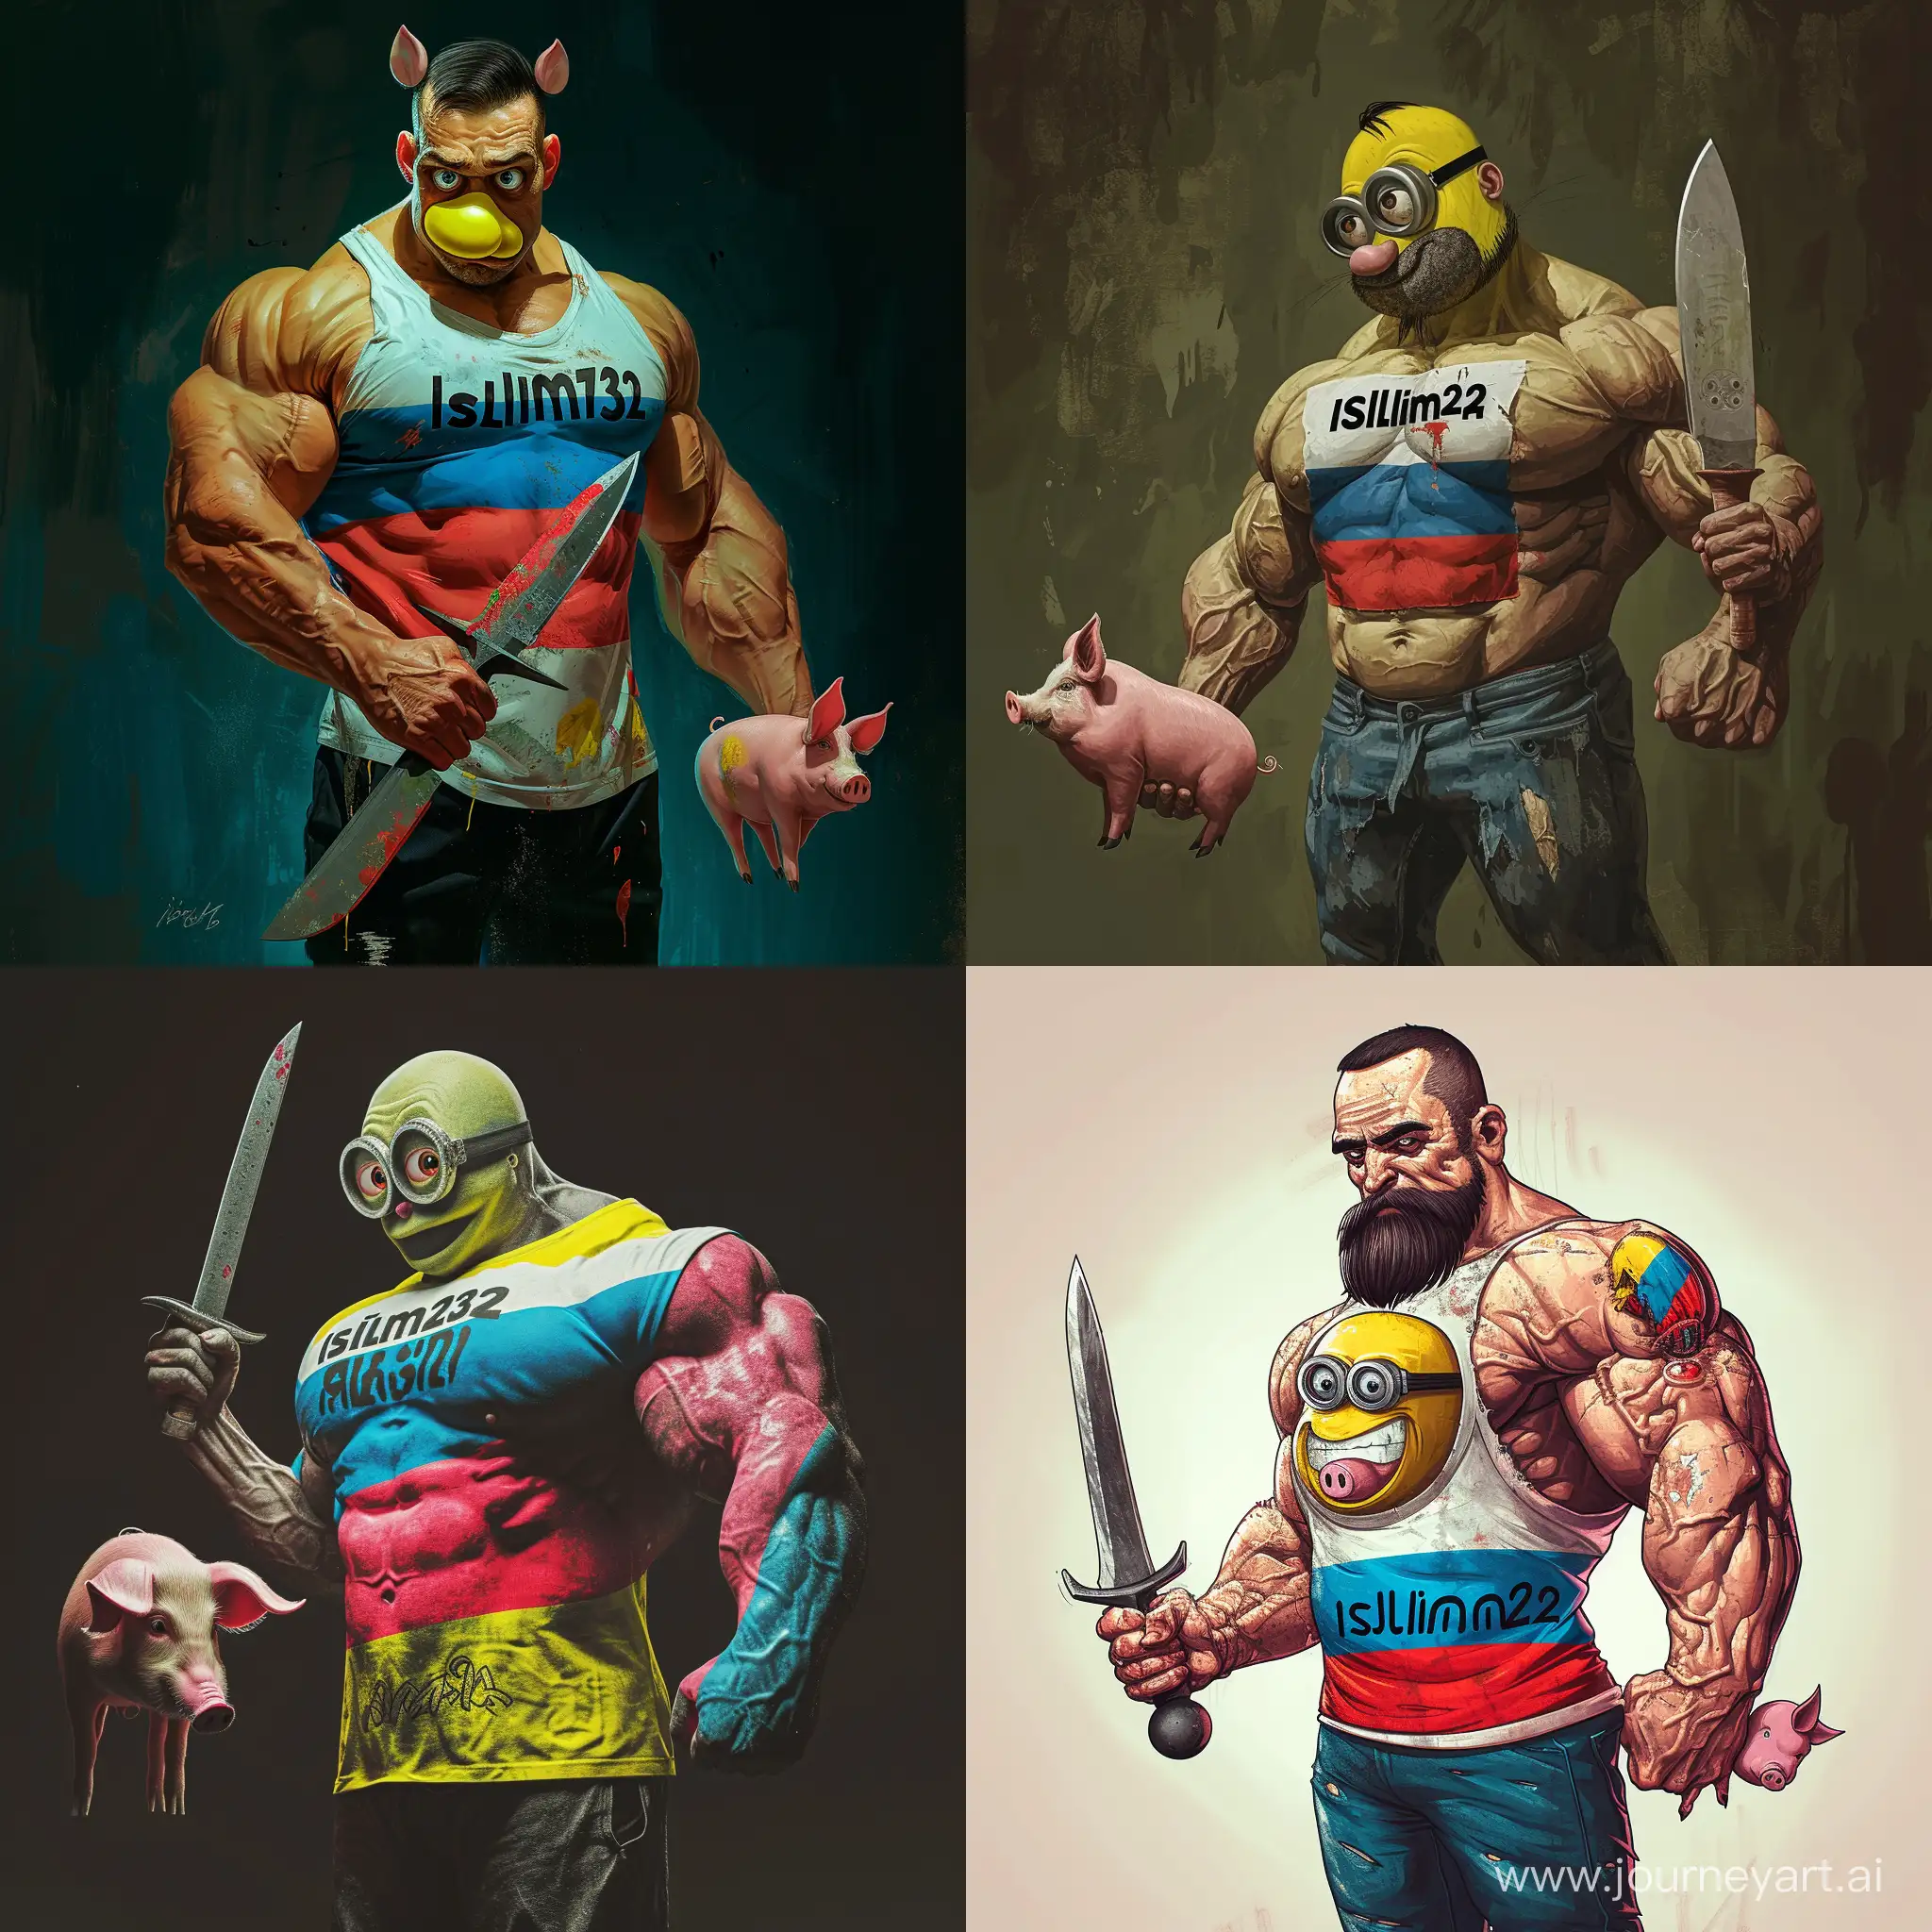 Muscular-Bodybuilder-in-ISLIM32-TShirt-Wielding-Knife-with-Russian-Flag-Colors-and-Holding-Pig